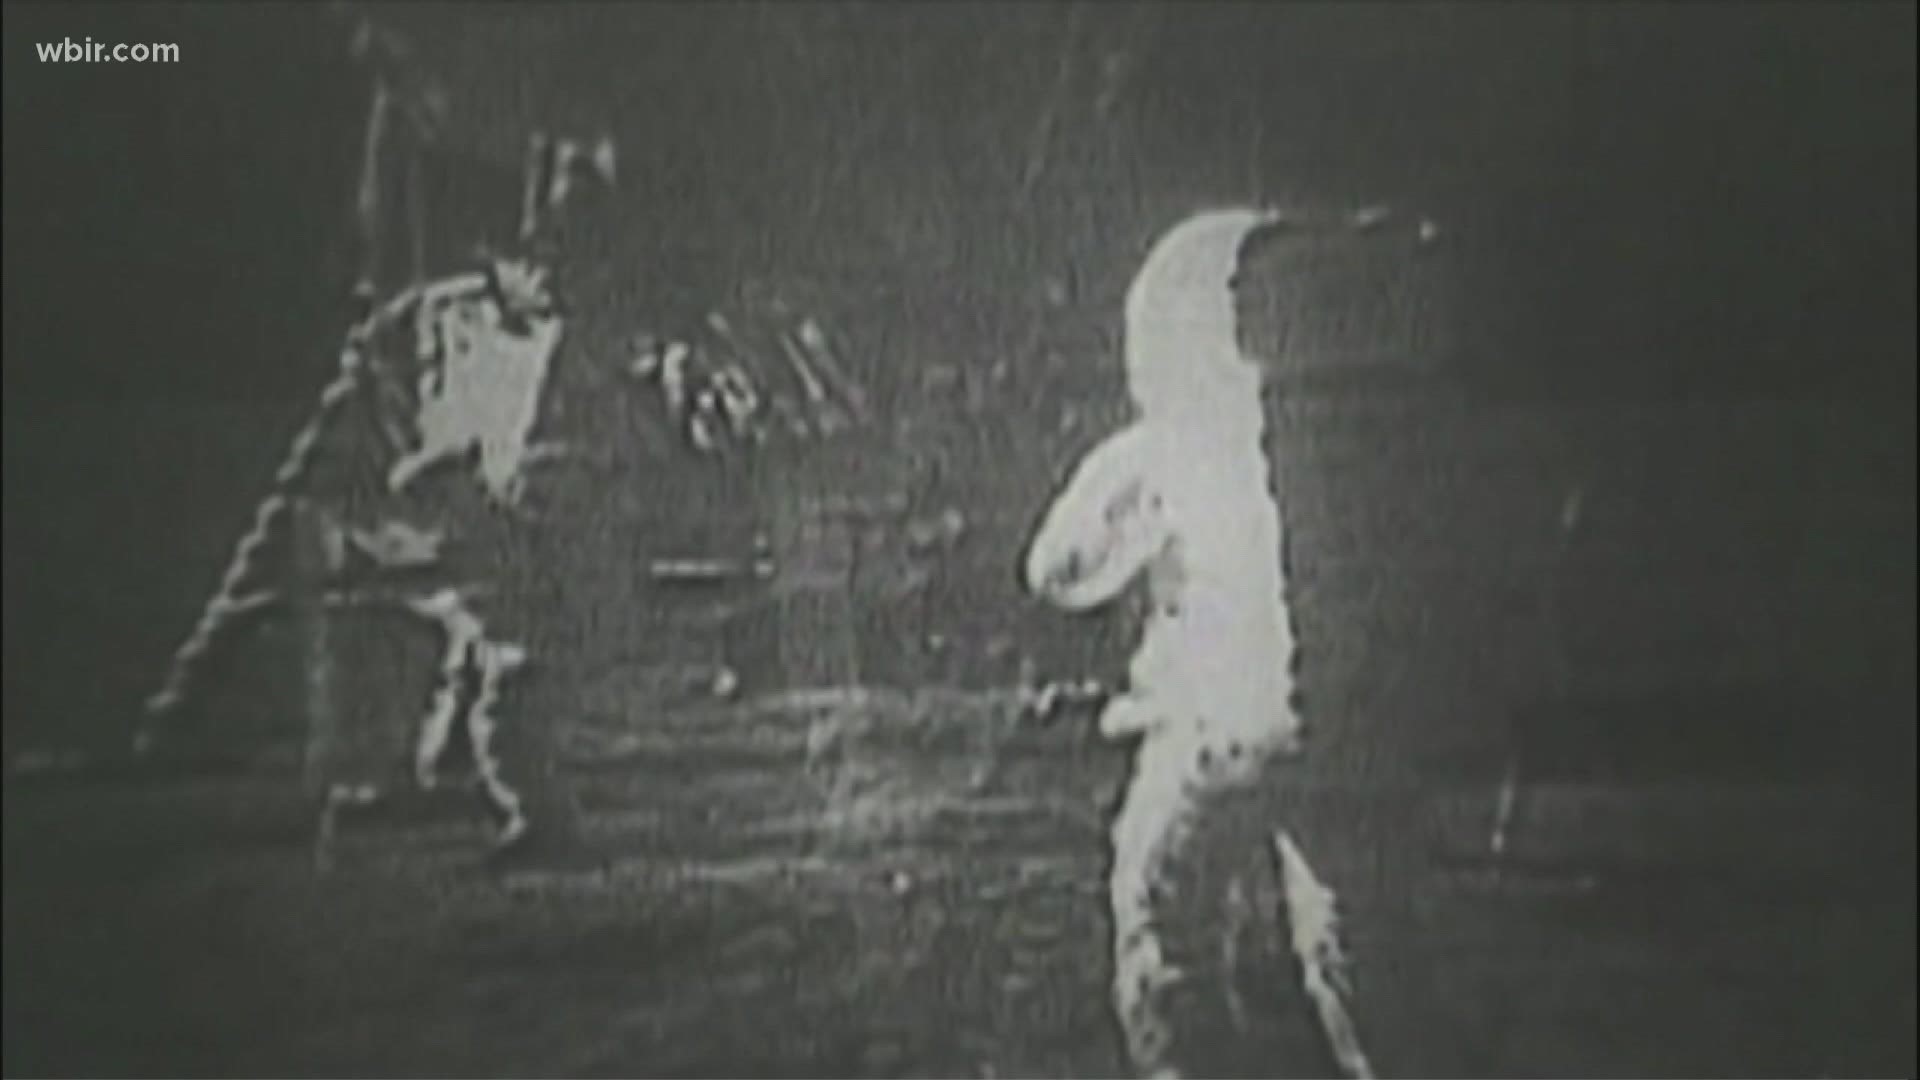 Astronauts Neil Armstrong and Buzz Aldrin landed on the surface while Michael Collins orbited the moon waiting for them to return.